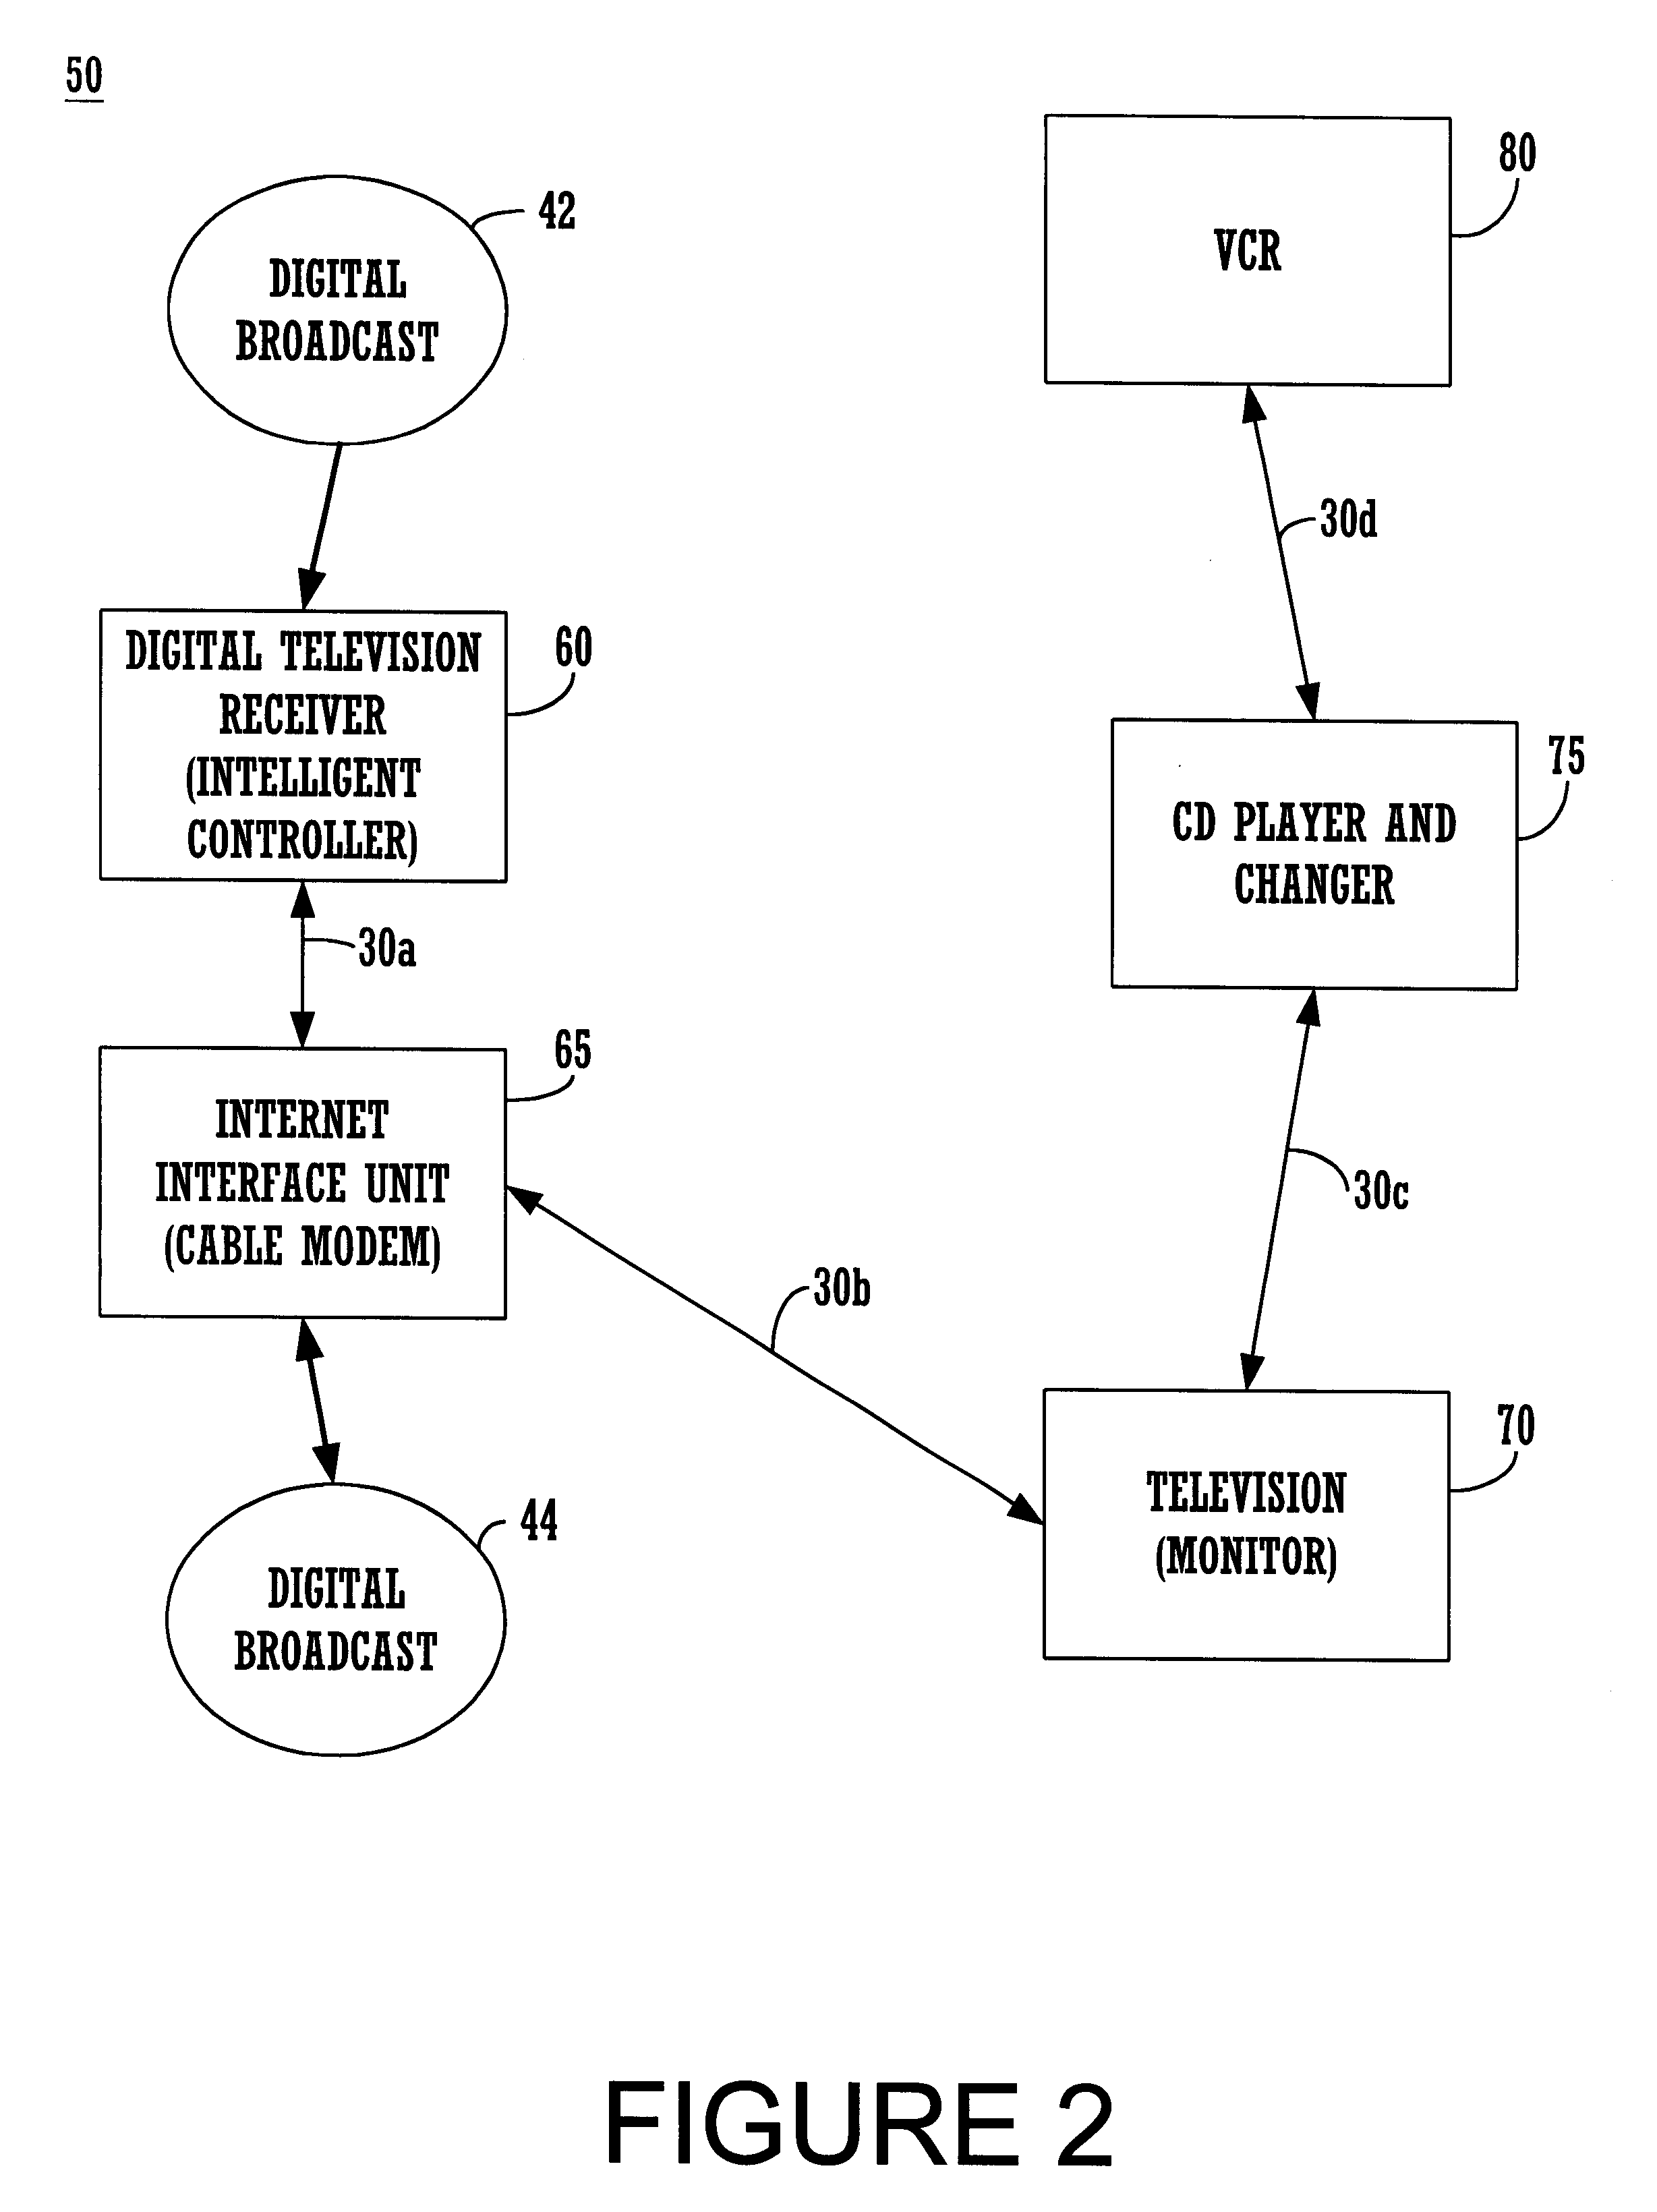 Method and system for modifying the visual presentation and response to user action of a broadcast application's user interface